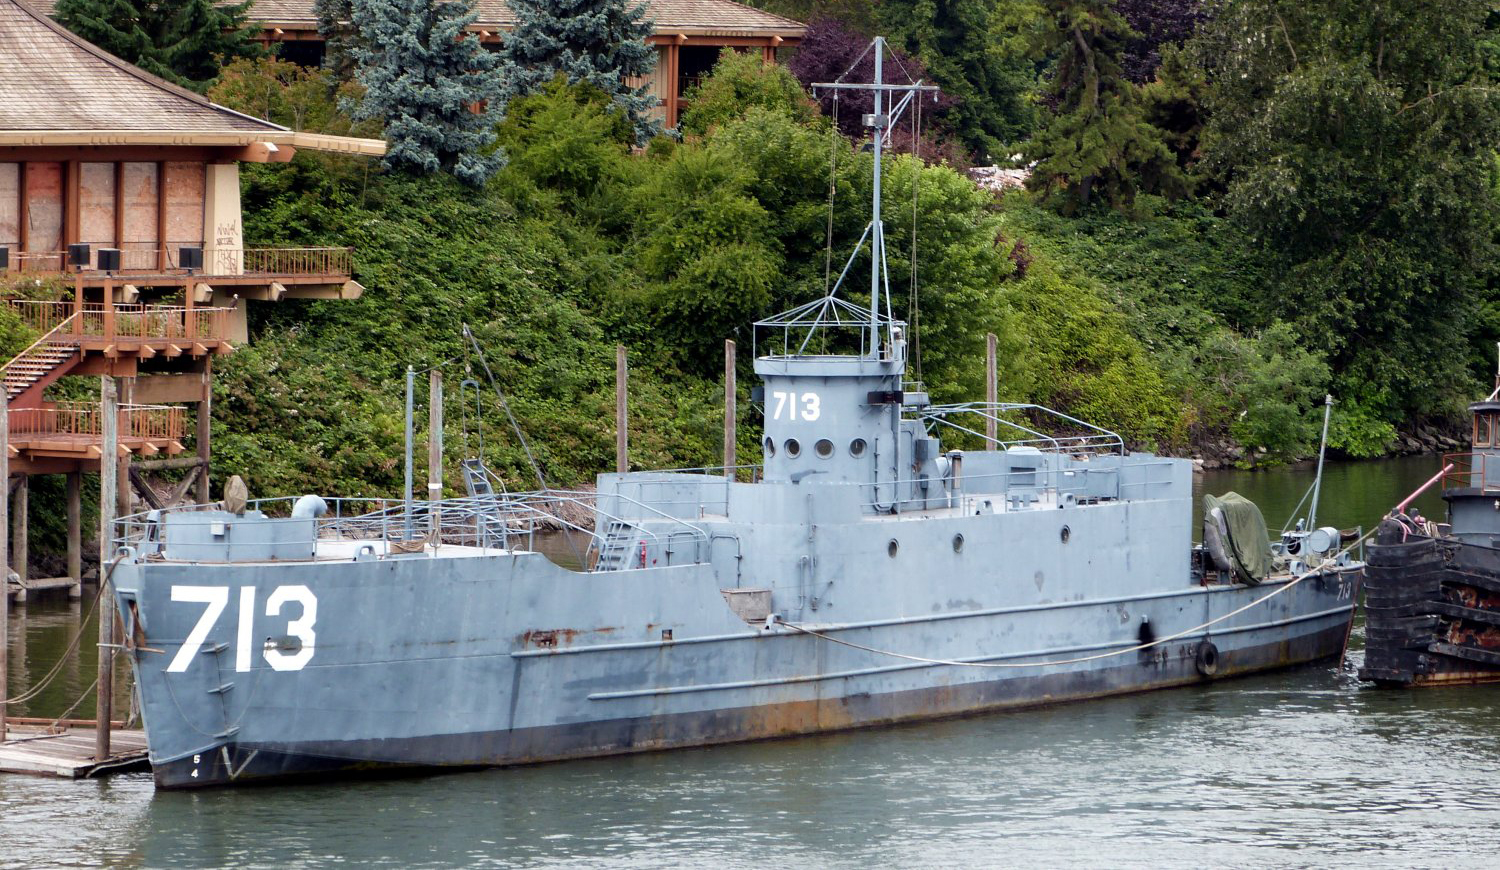 USS CLI 713 at current location in Portland